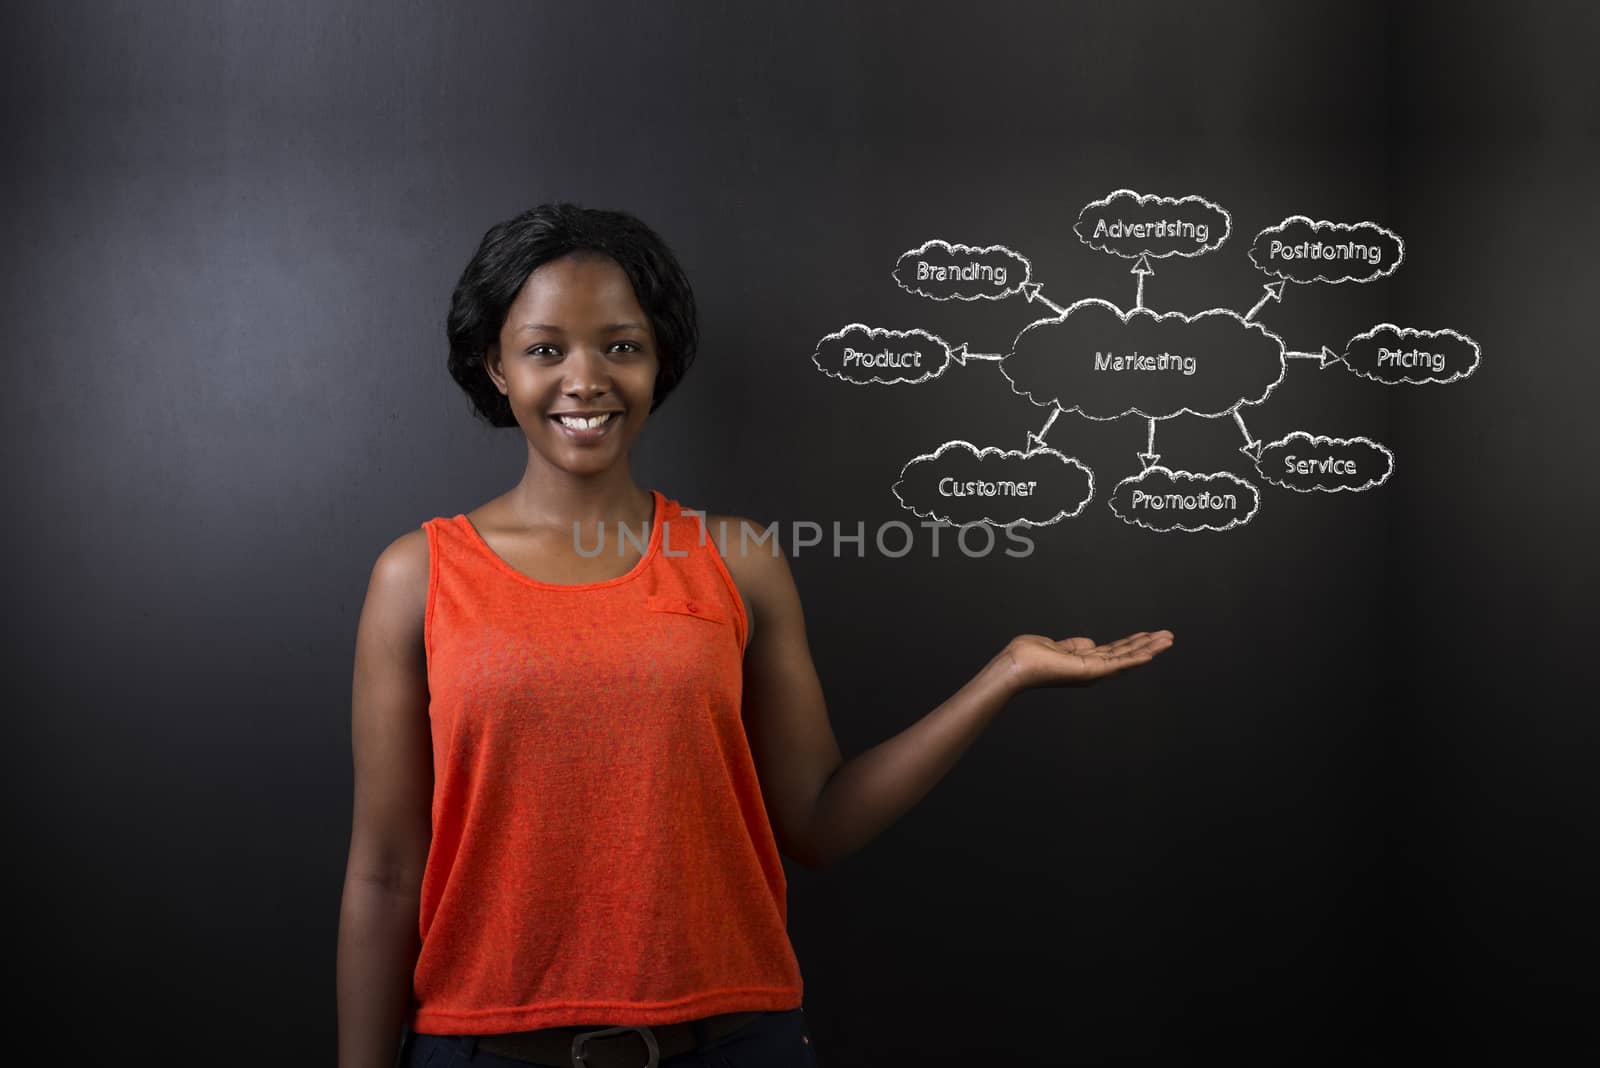 South African or African American woman teacher or student holding hand out standing against a blackboard background with a chalk marketing diagram